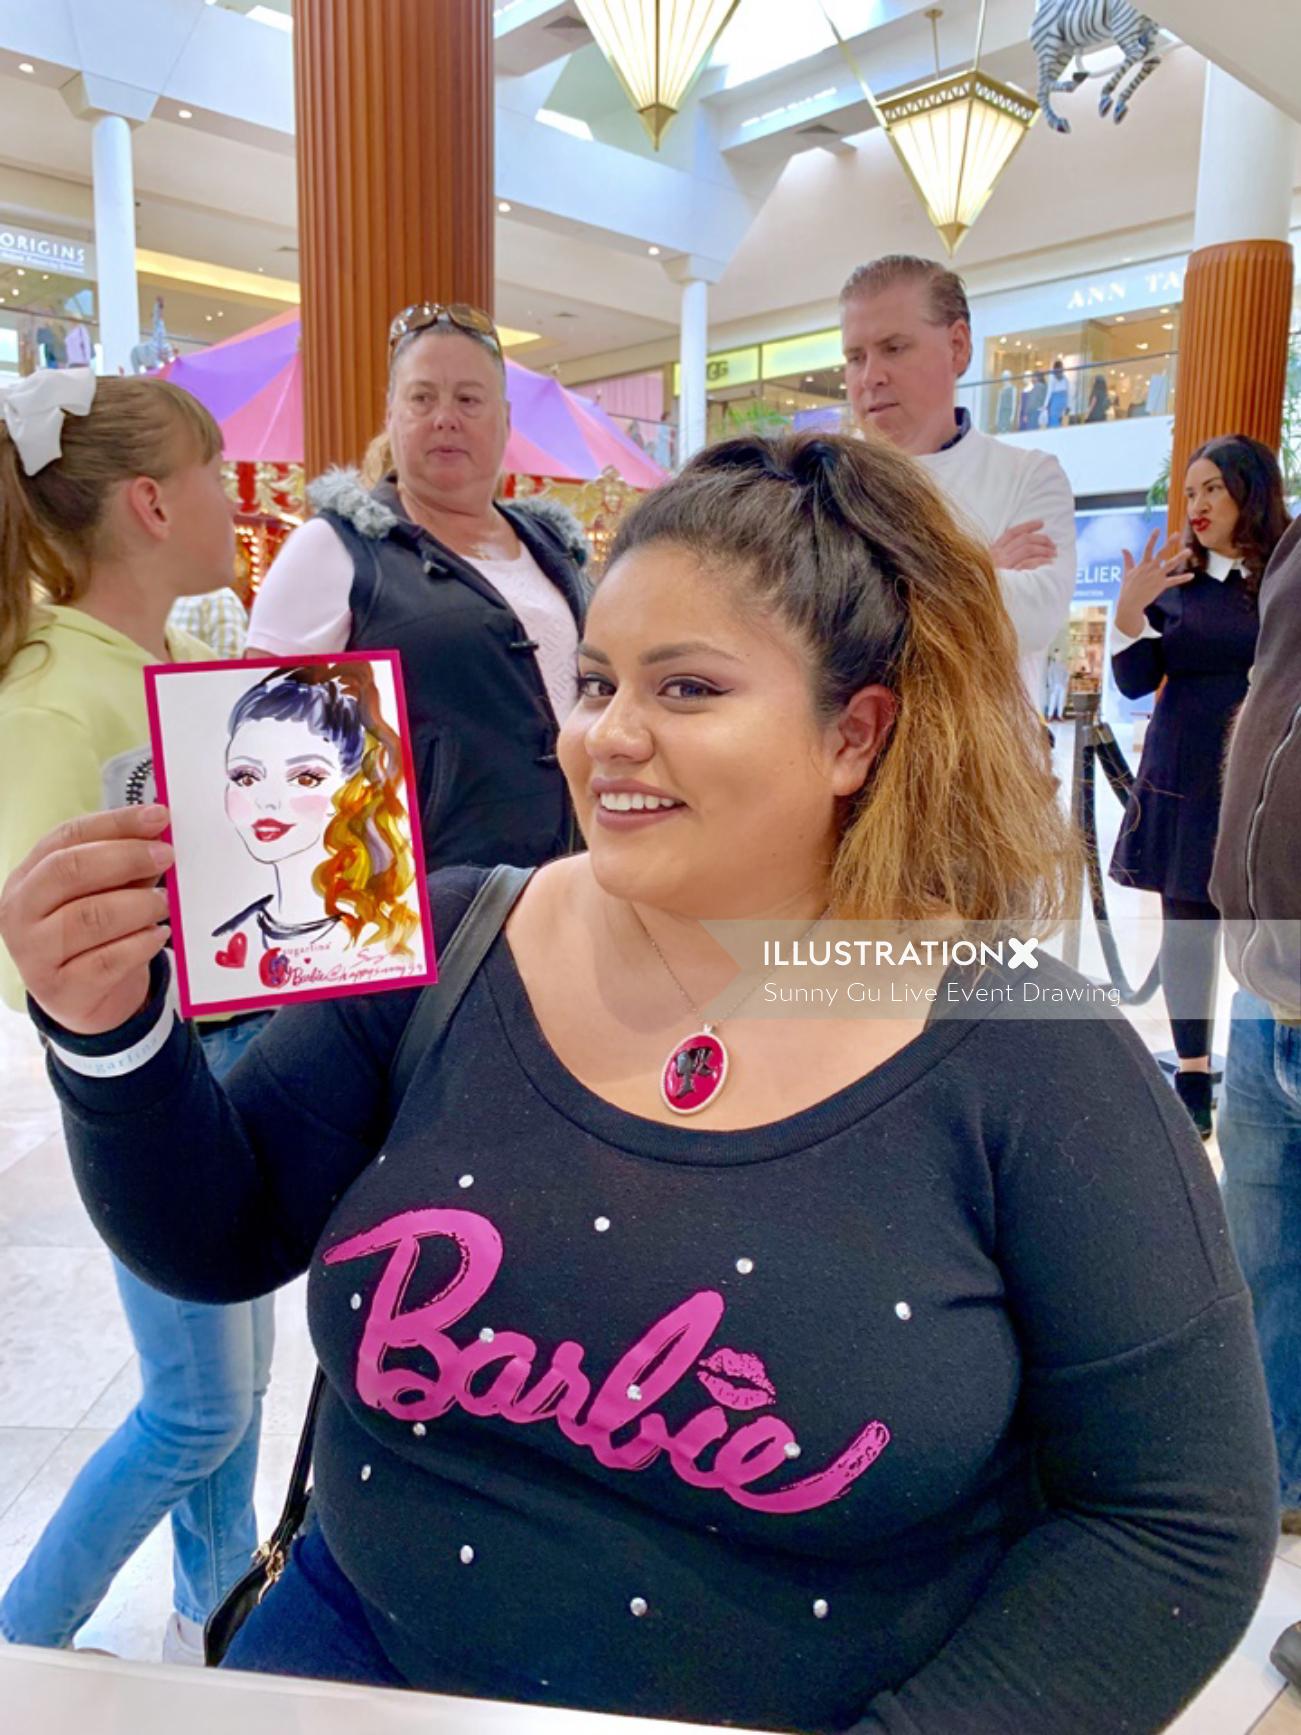 Live event of Girl with Barbie shirt
